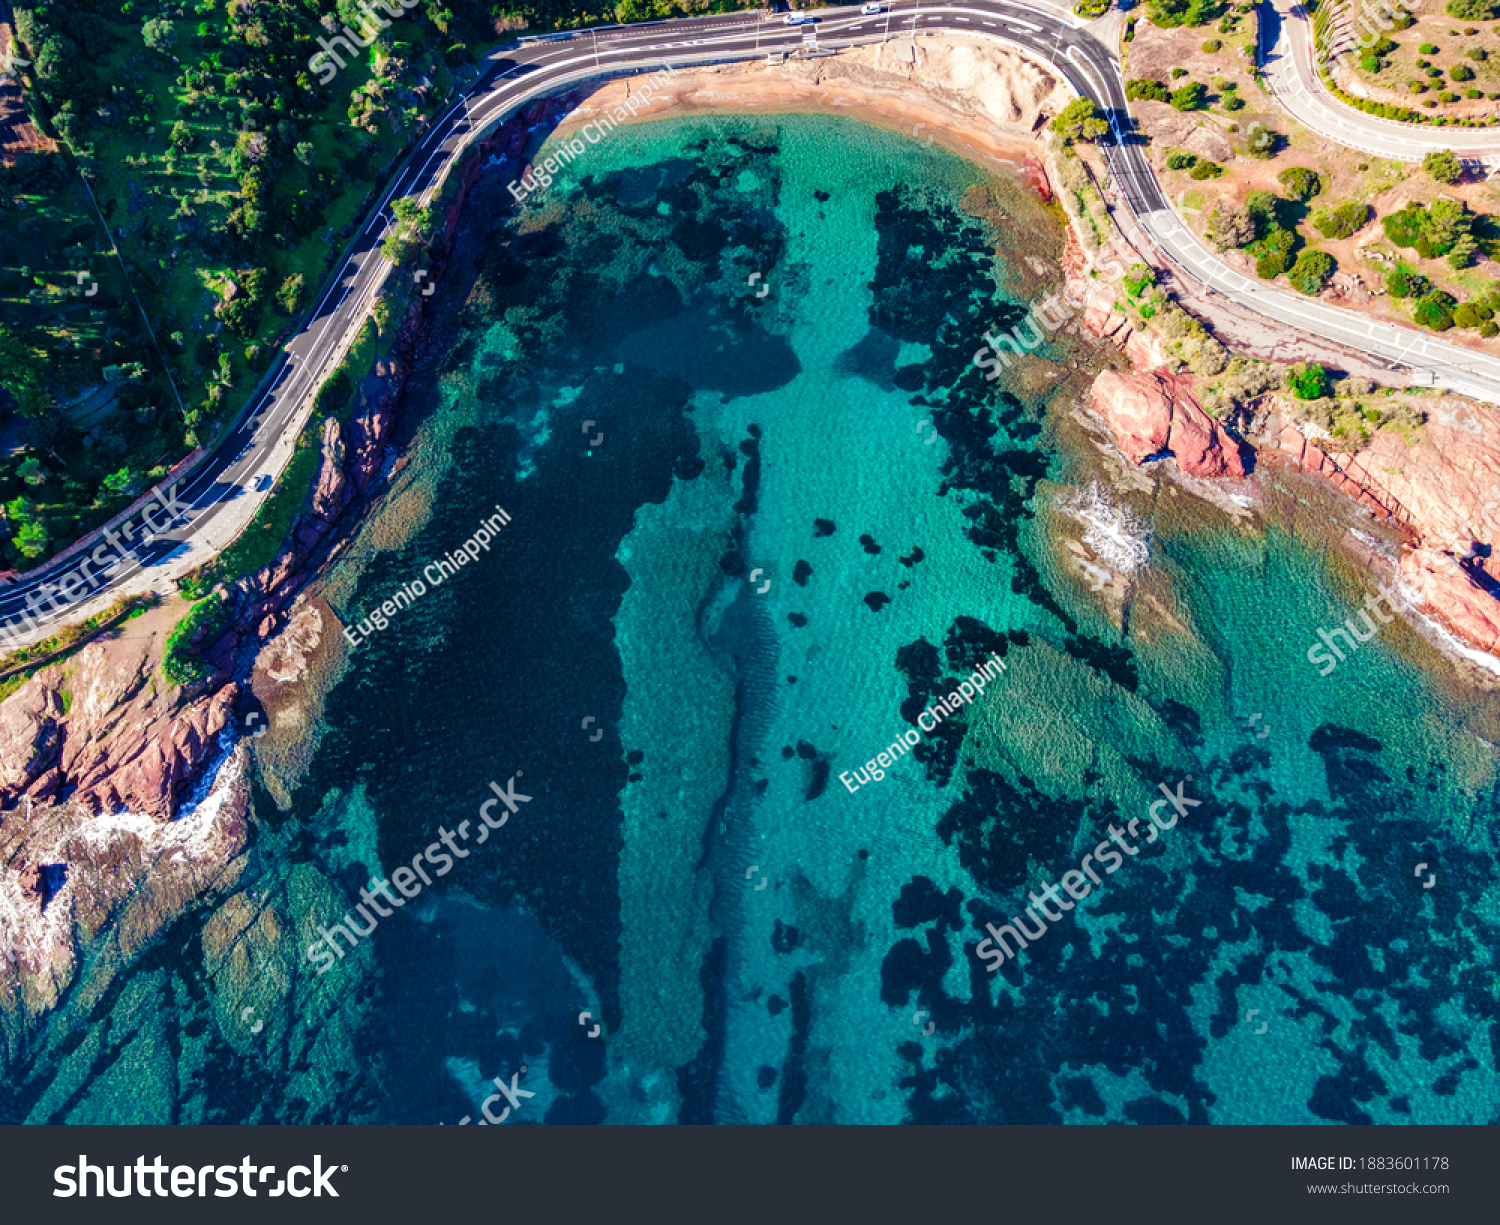 Beach and Coastline French Riviera Côte d'Azur turquoise colour water with red rocks, Roche rouge alongside a road in the village of Agay, close to Cannes #1883601178